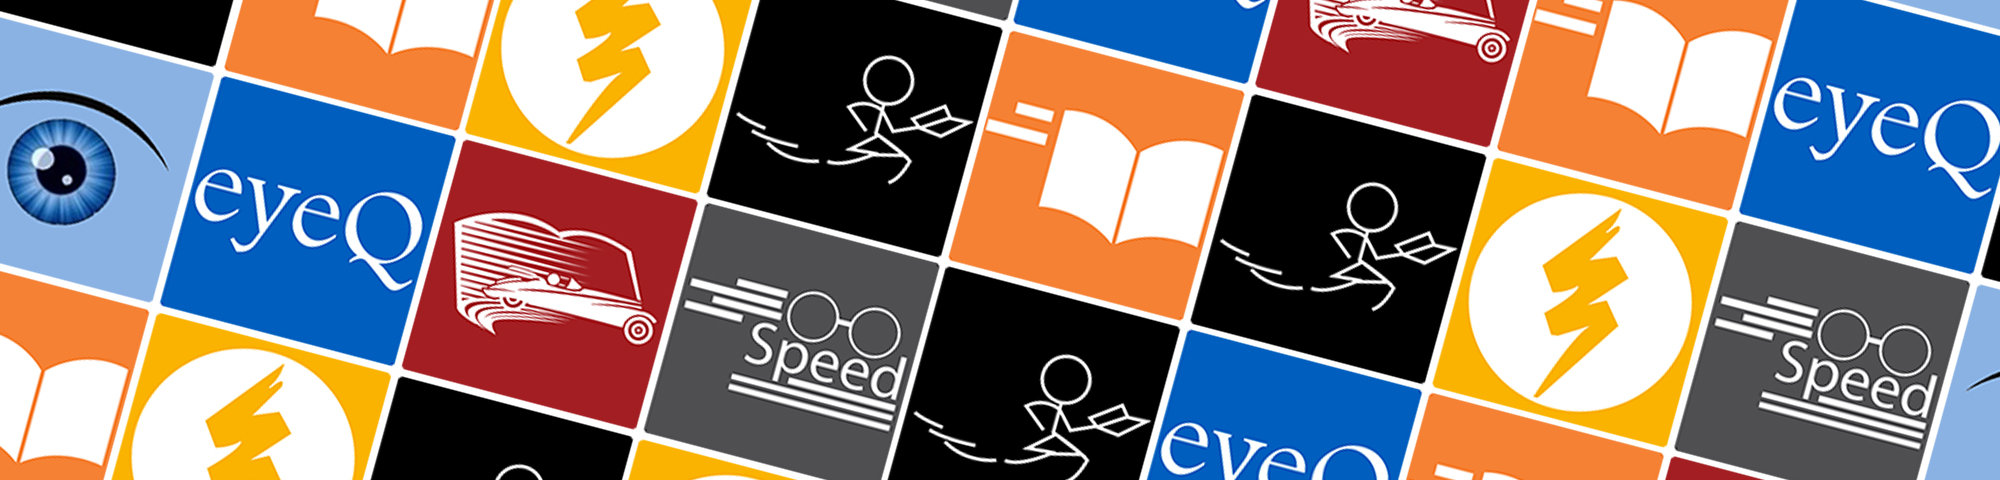 top speed reading software